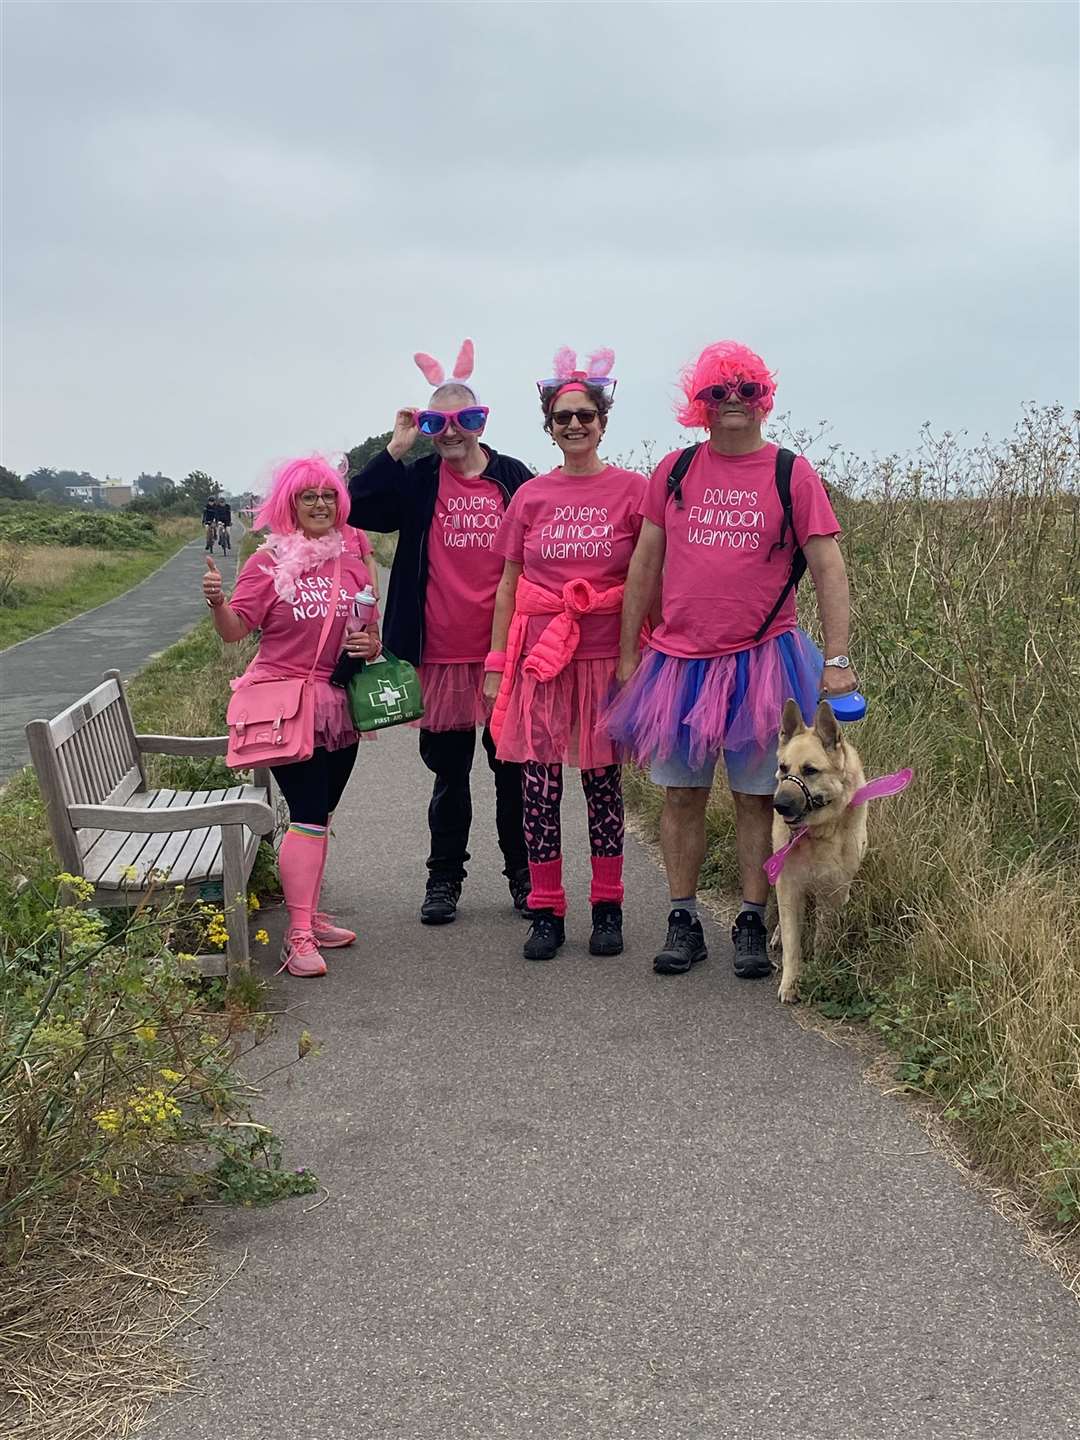 Men and women dressed in pink for the walk. Picture from Kerry Banks